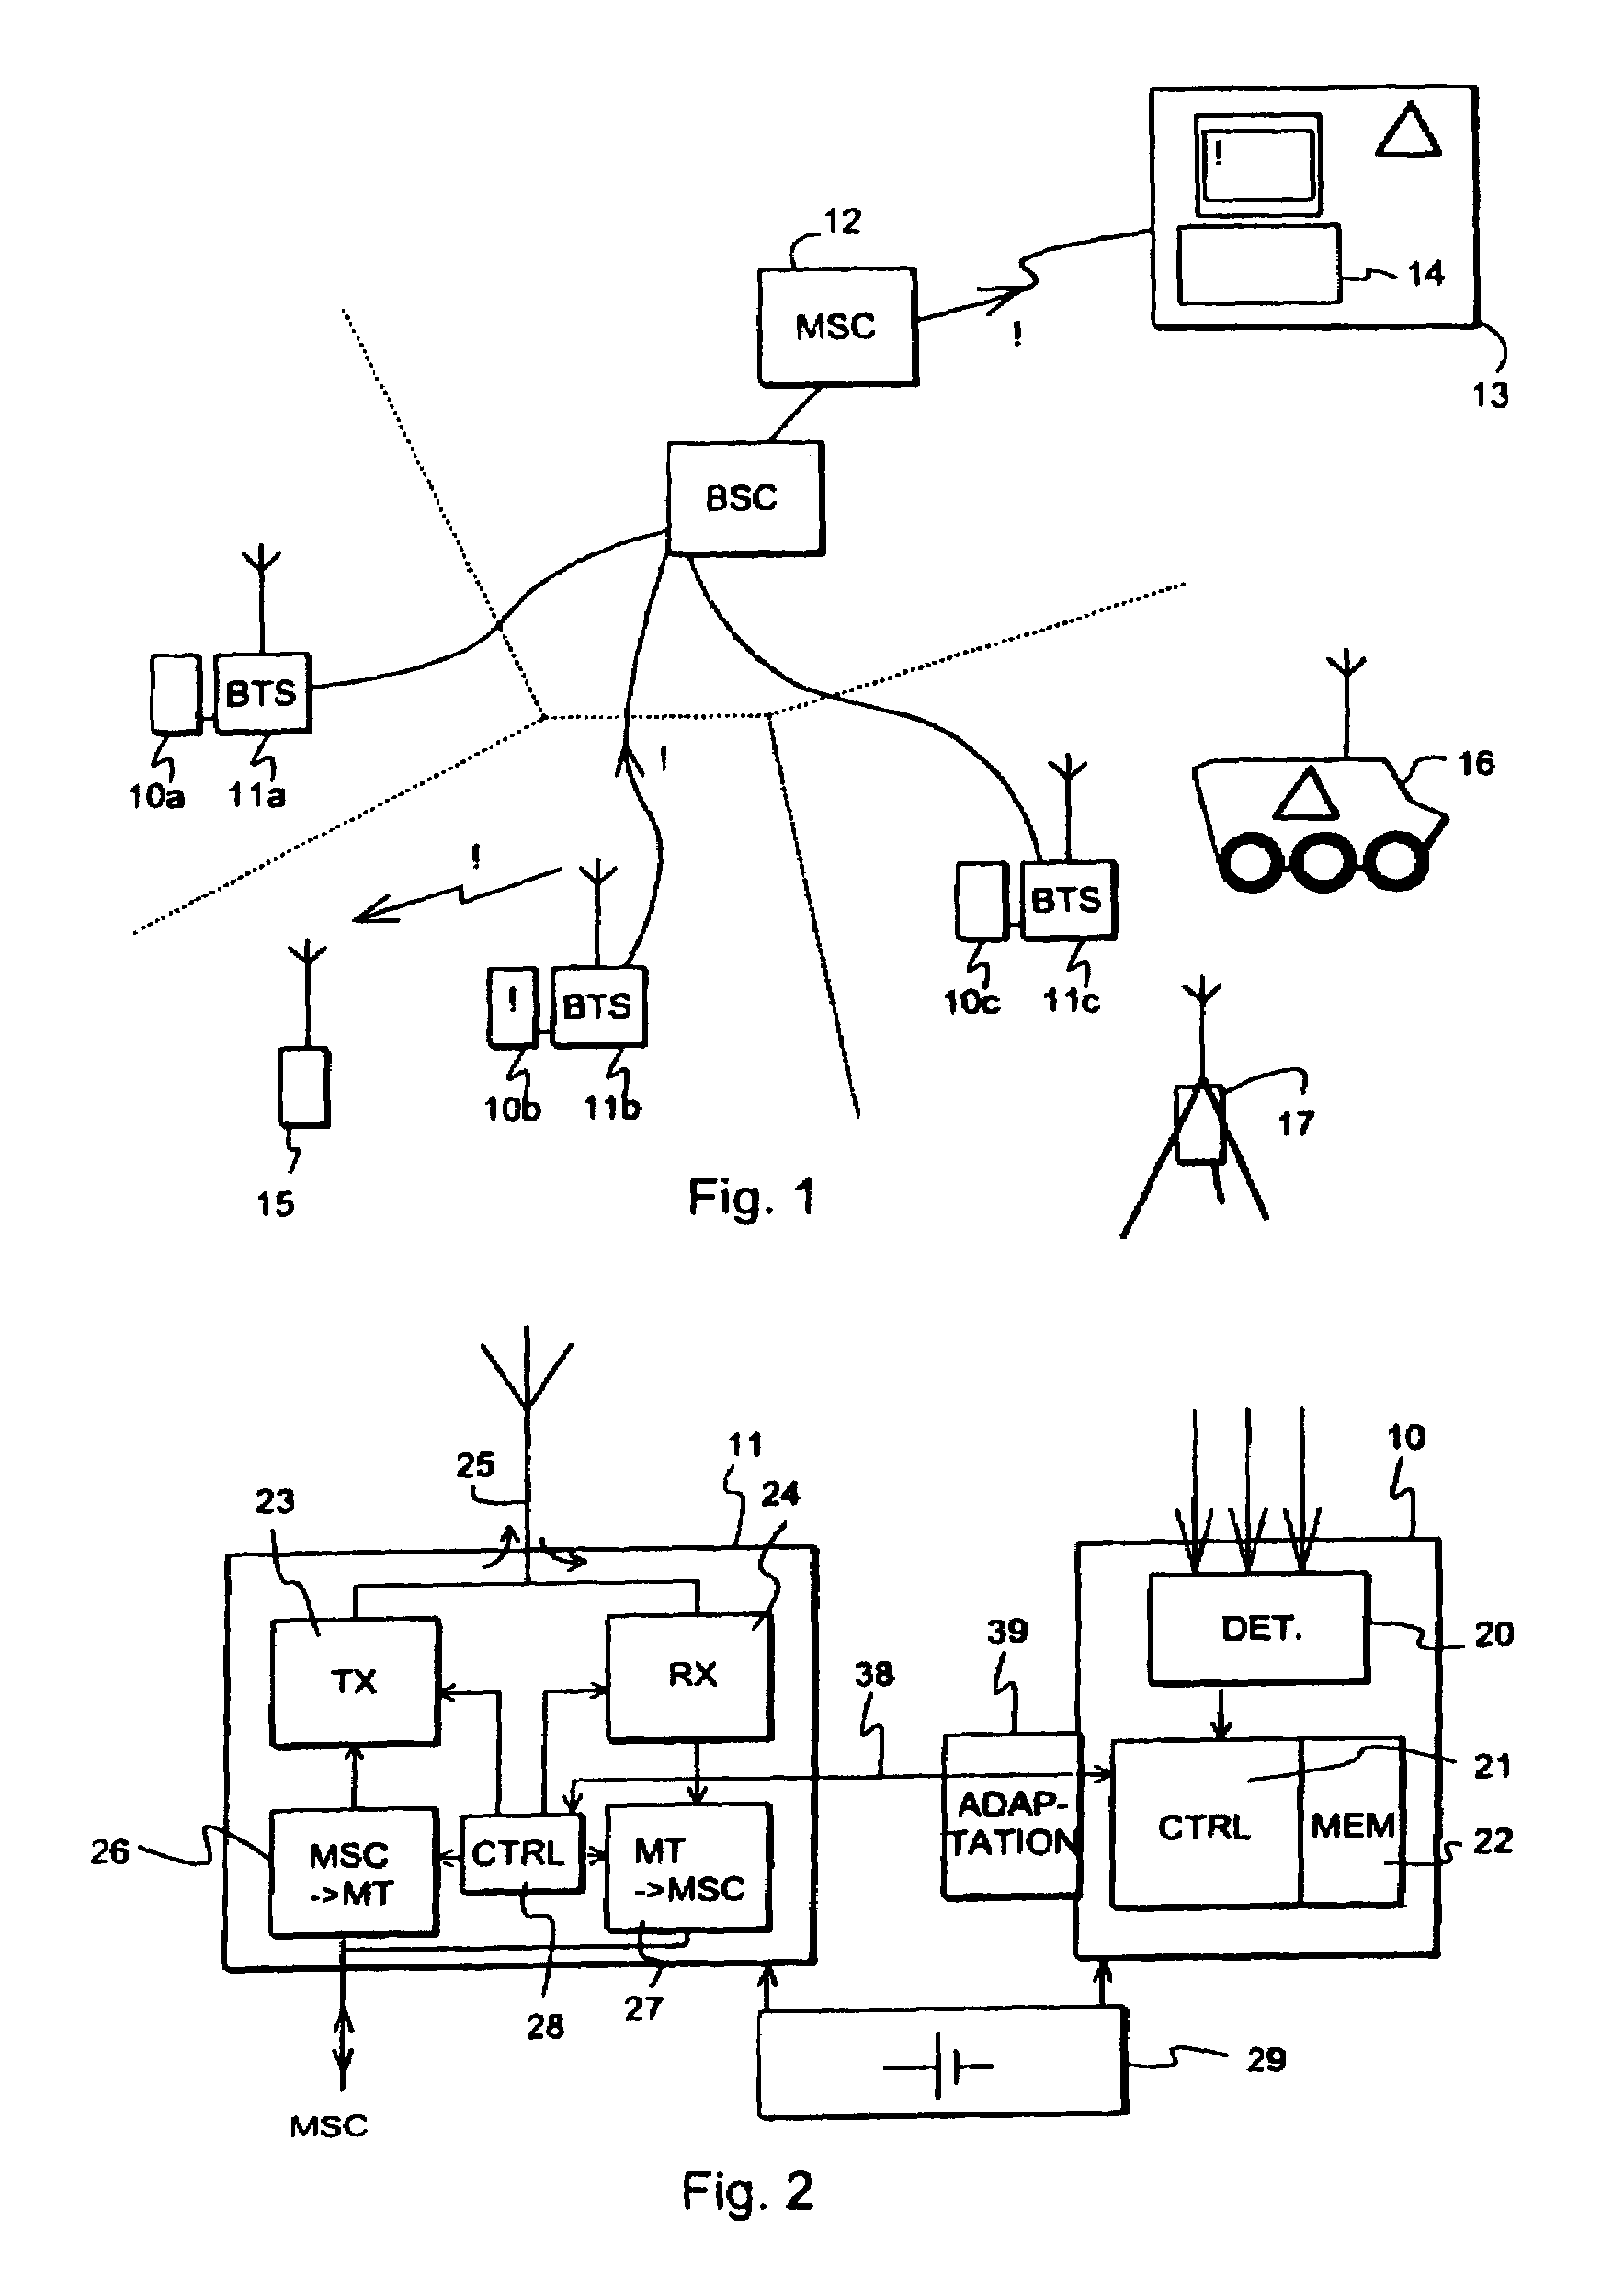 System for performing environmental measurements and for transferring measurement results